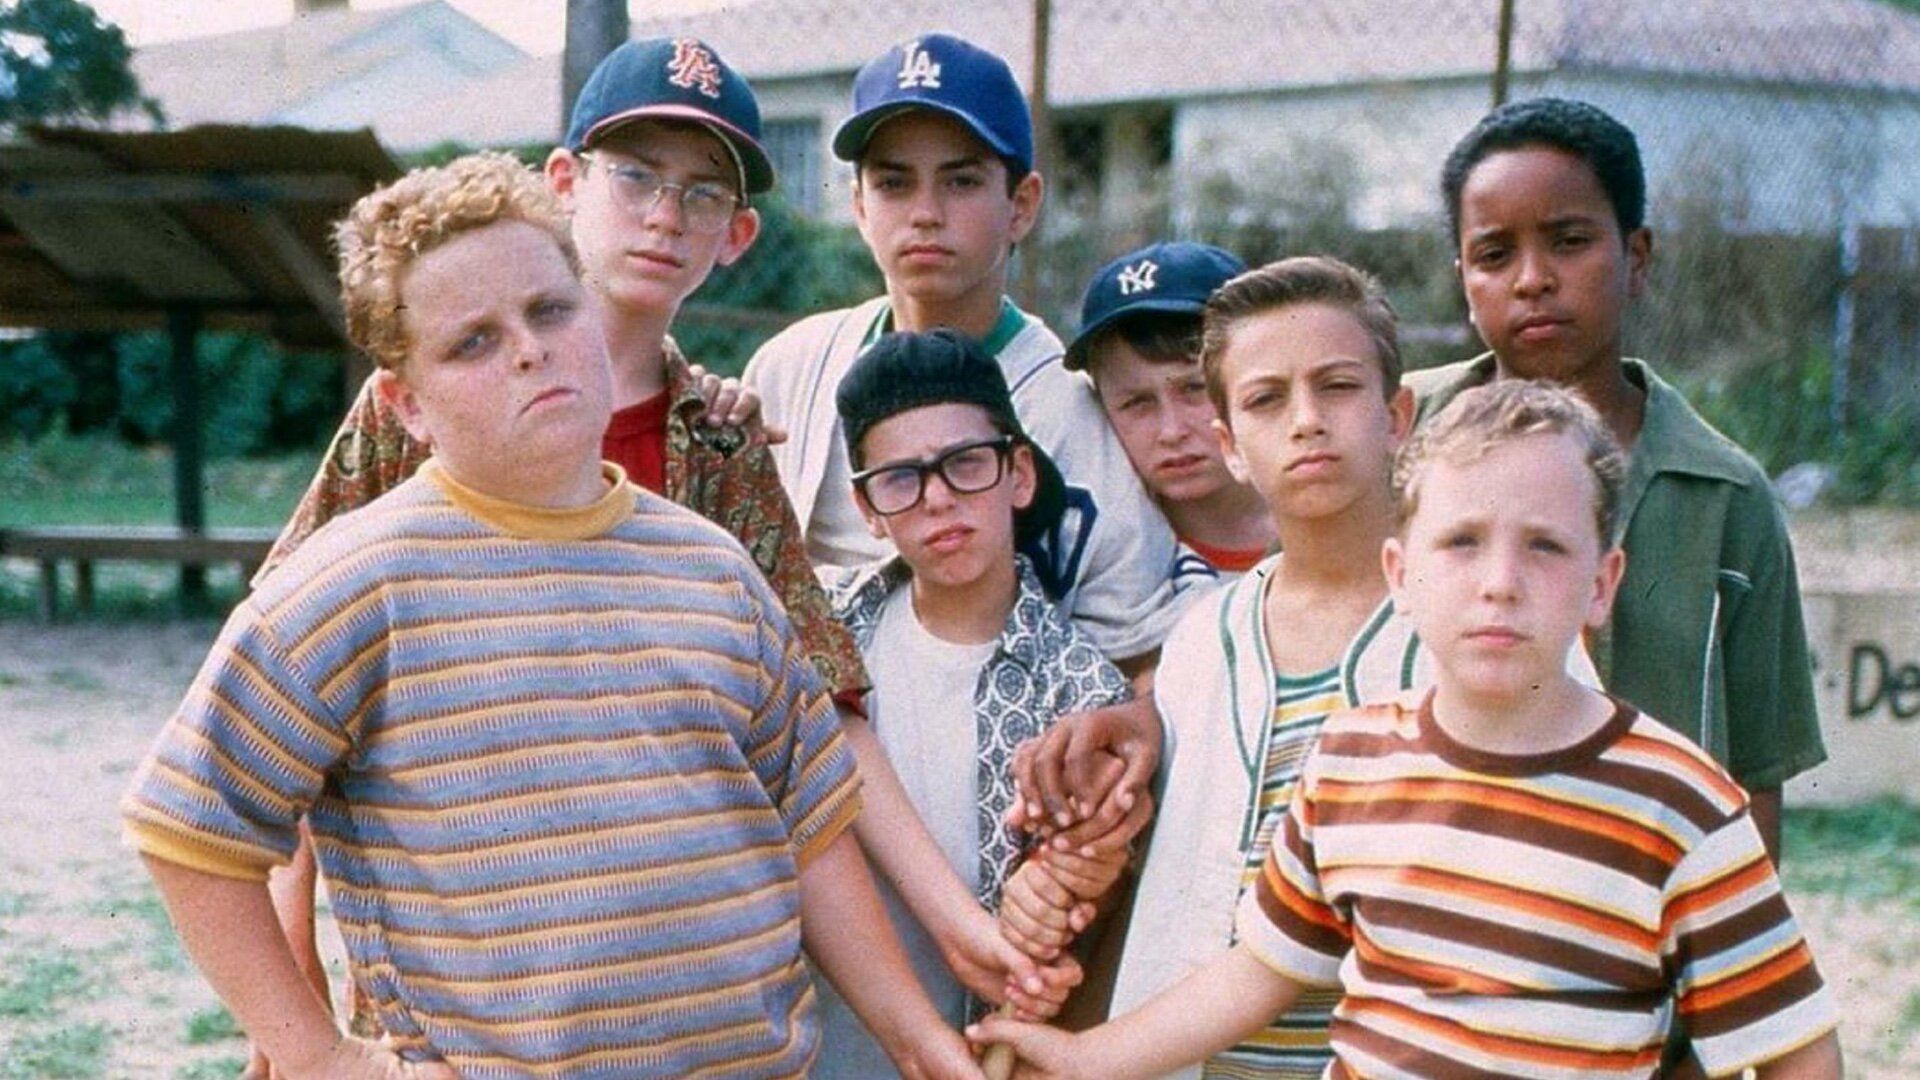 for the Virtual Cast Reunion of THE SANDLOT!